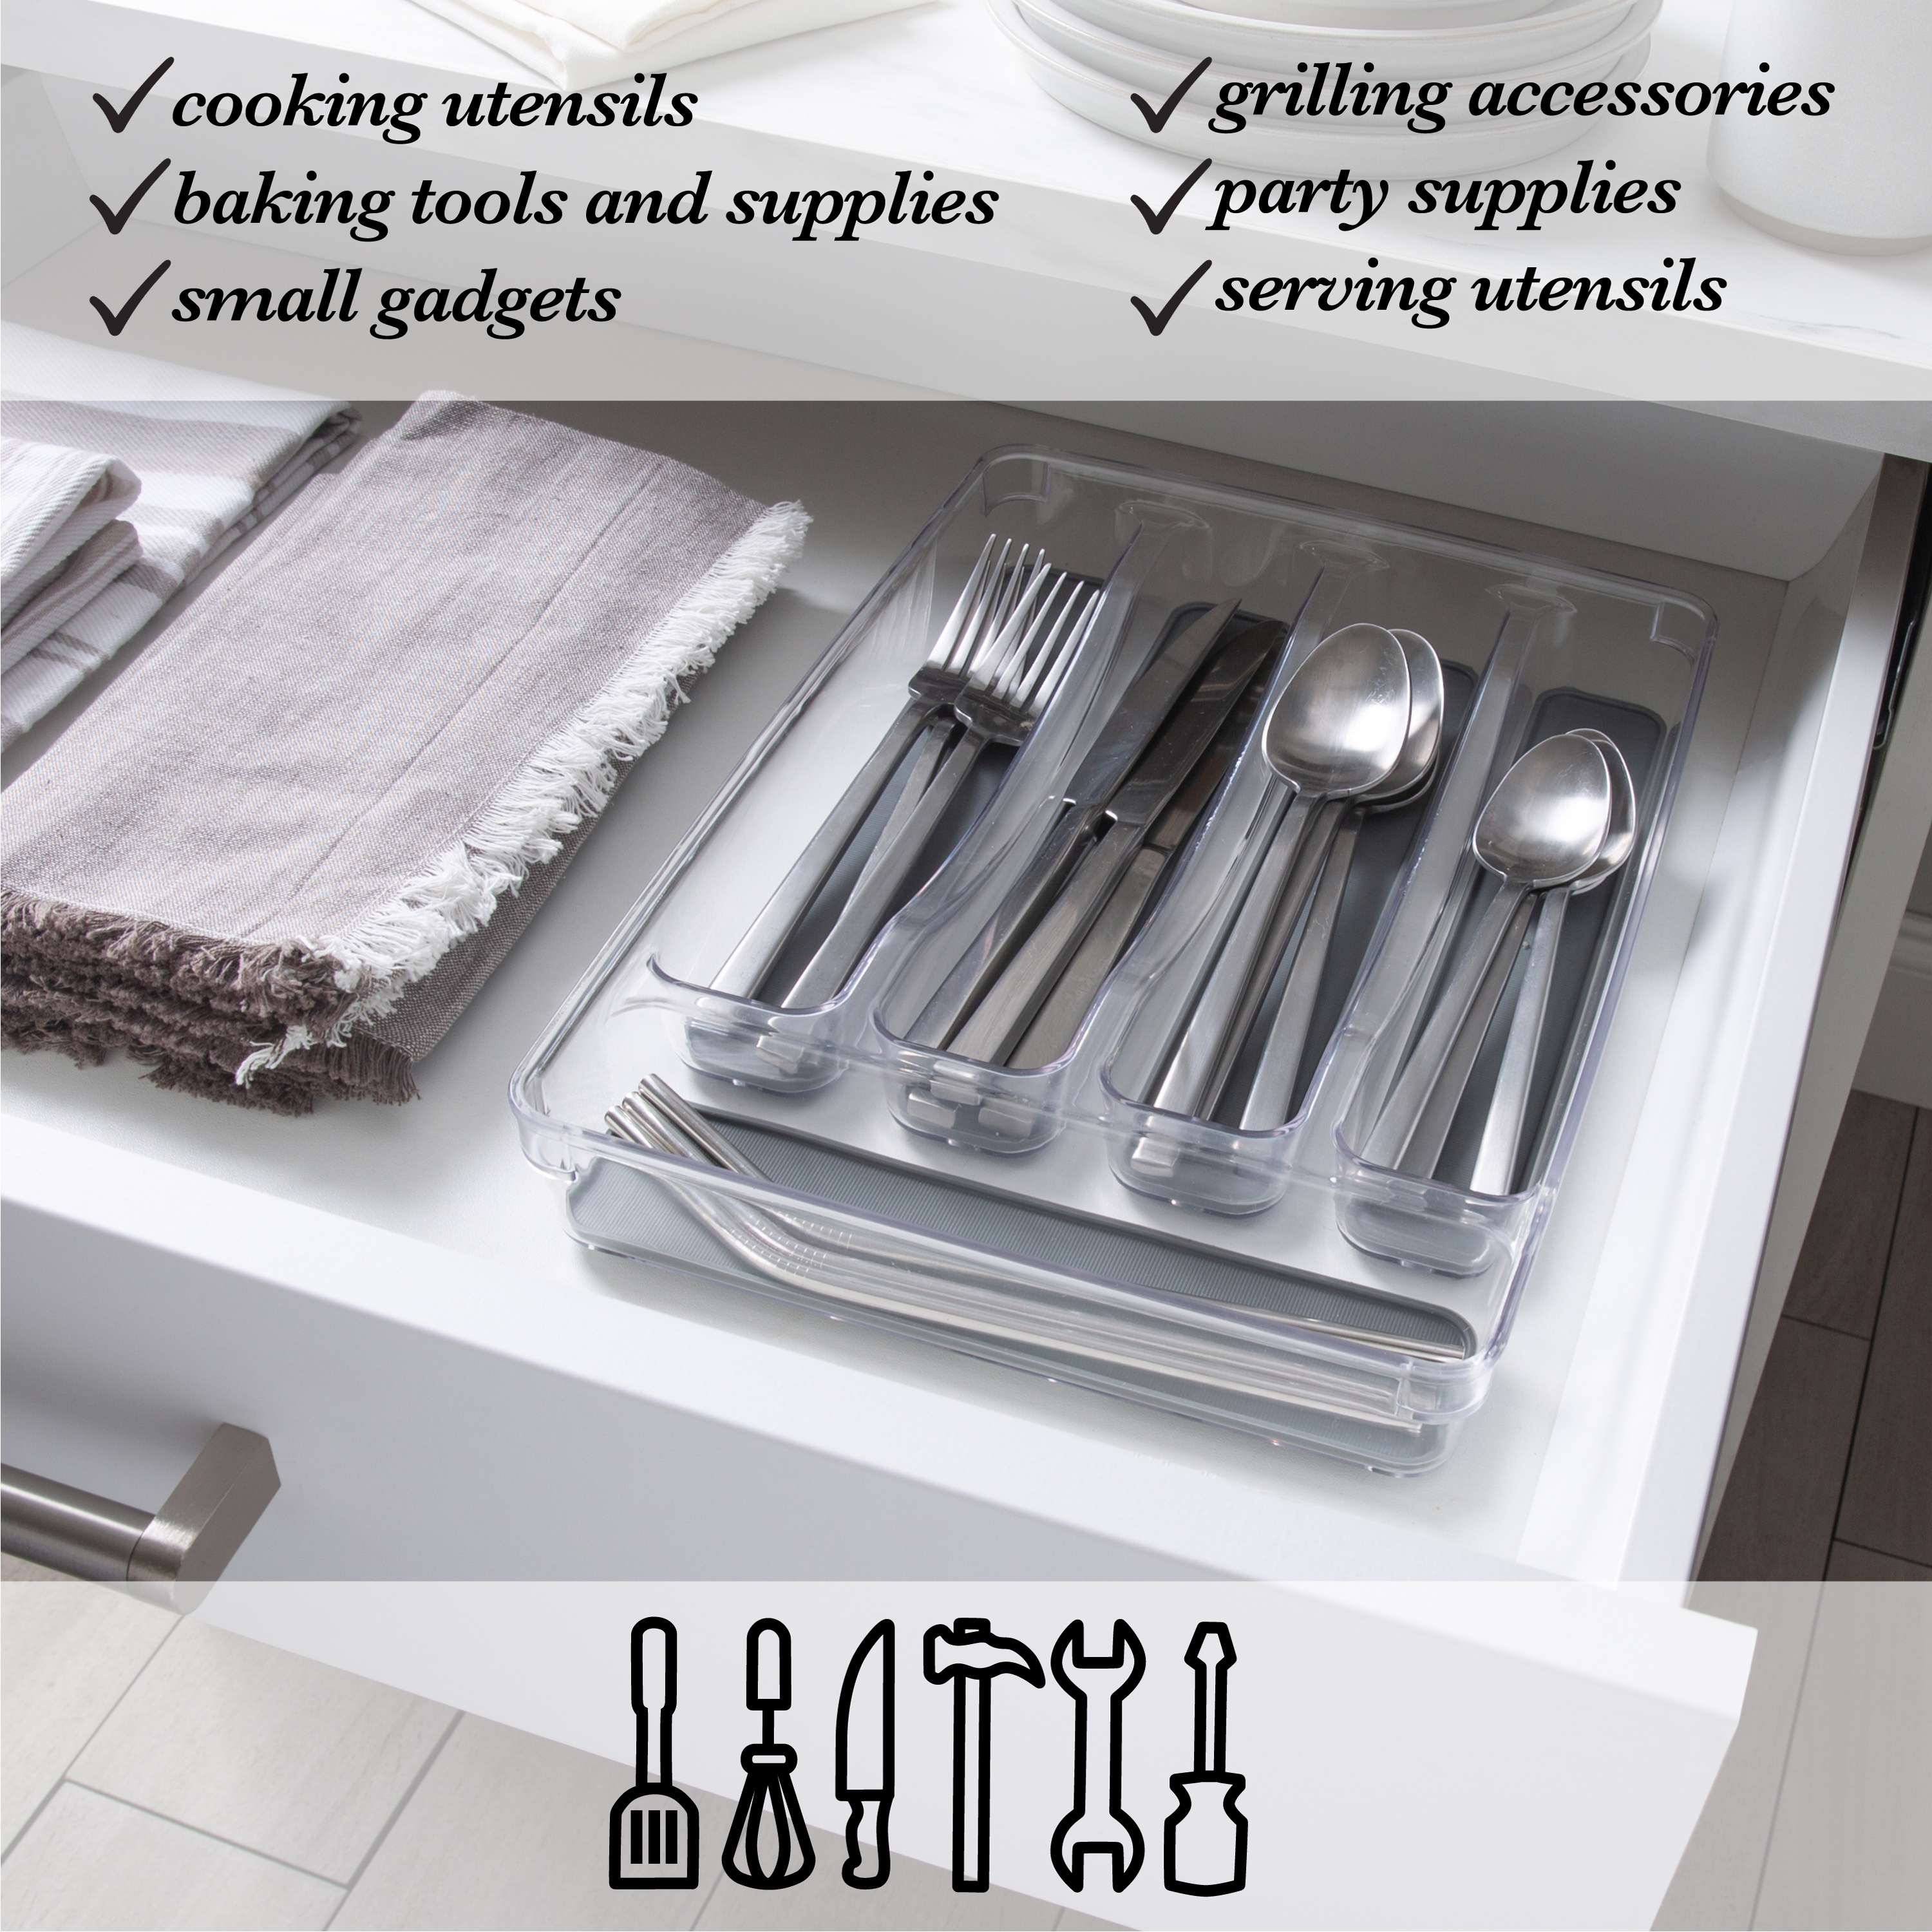 Kitchen Details 5 Compartment Plastic Cutlery Tray, Clear - image 3 of 8